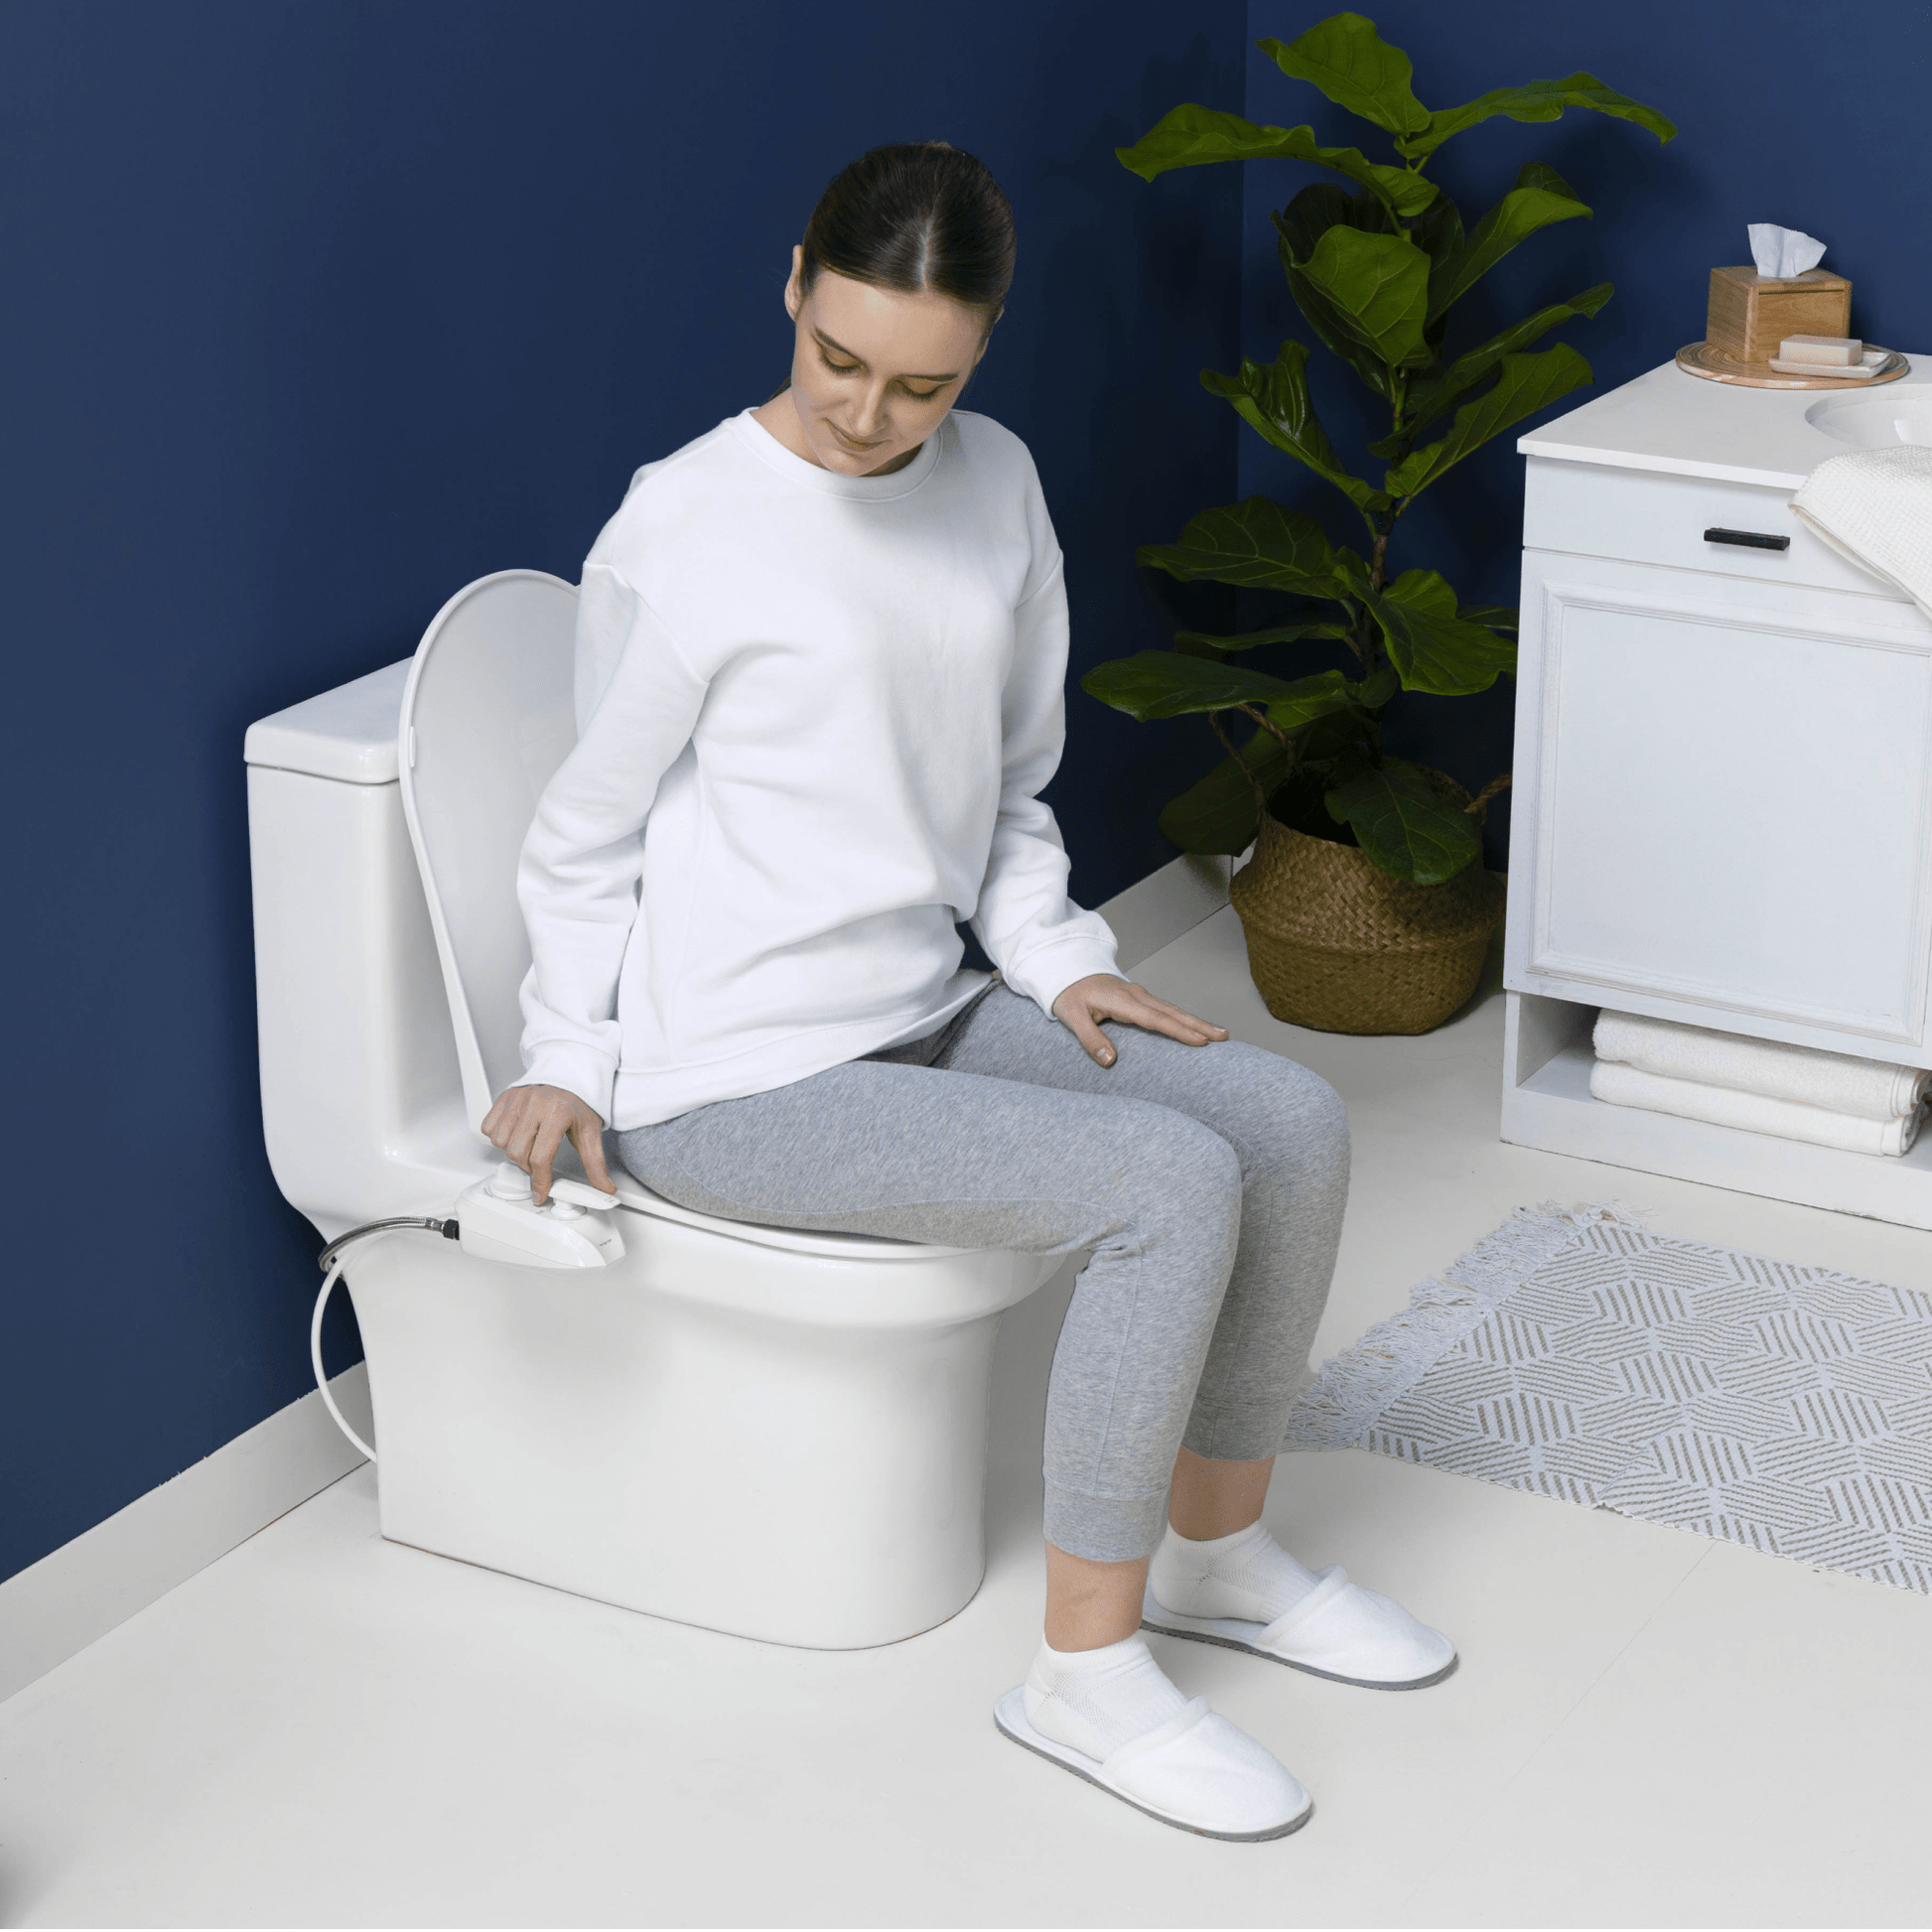 NEO 320 Plus White is a functional addition to the bathroom for anyone